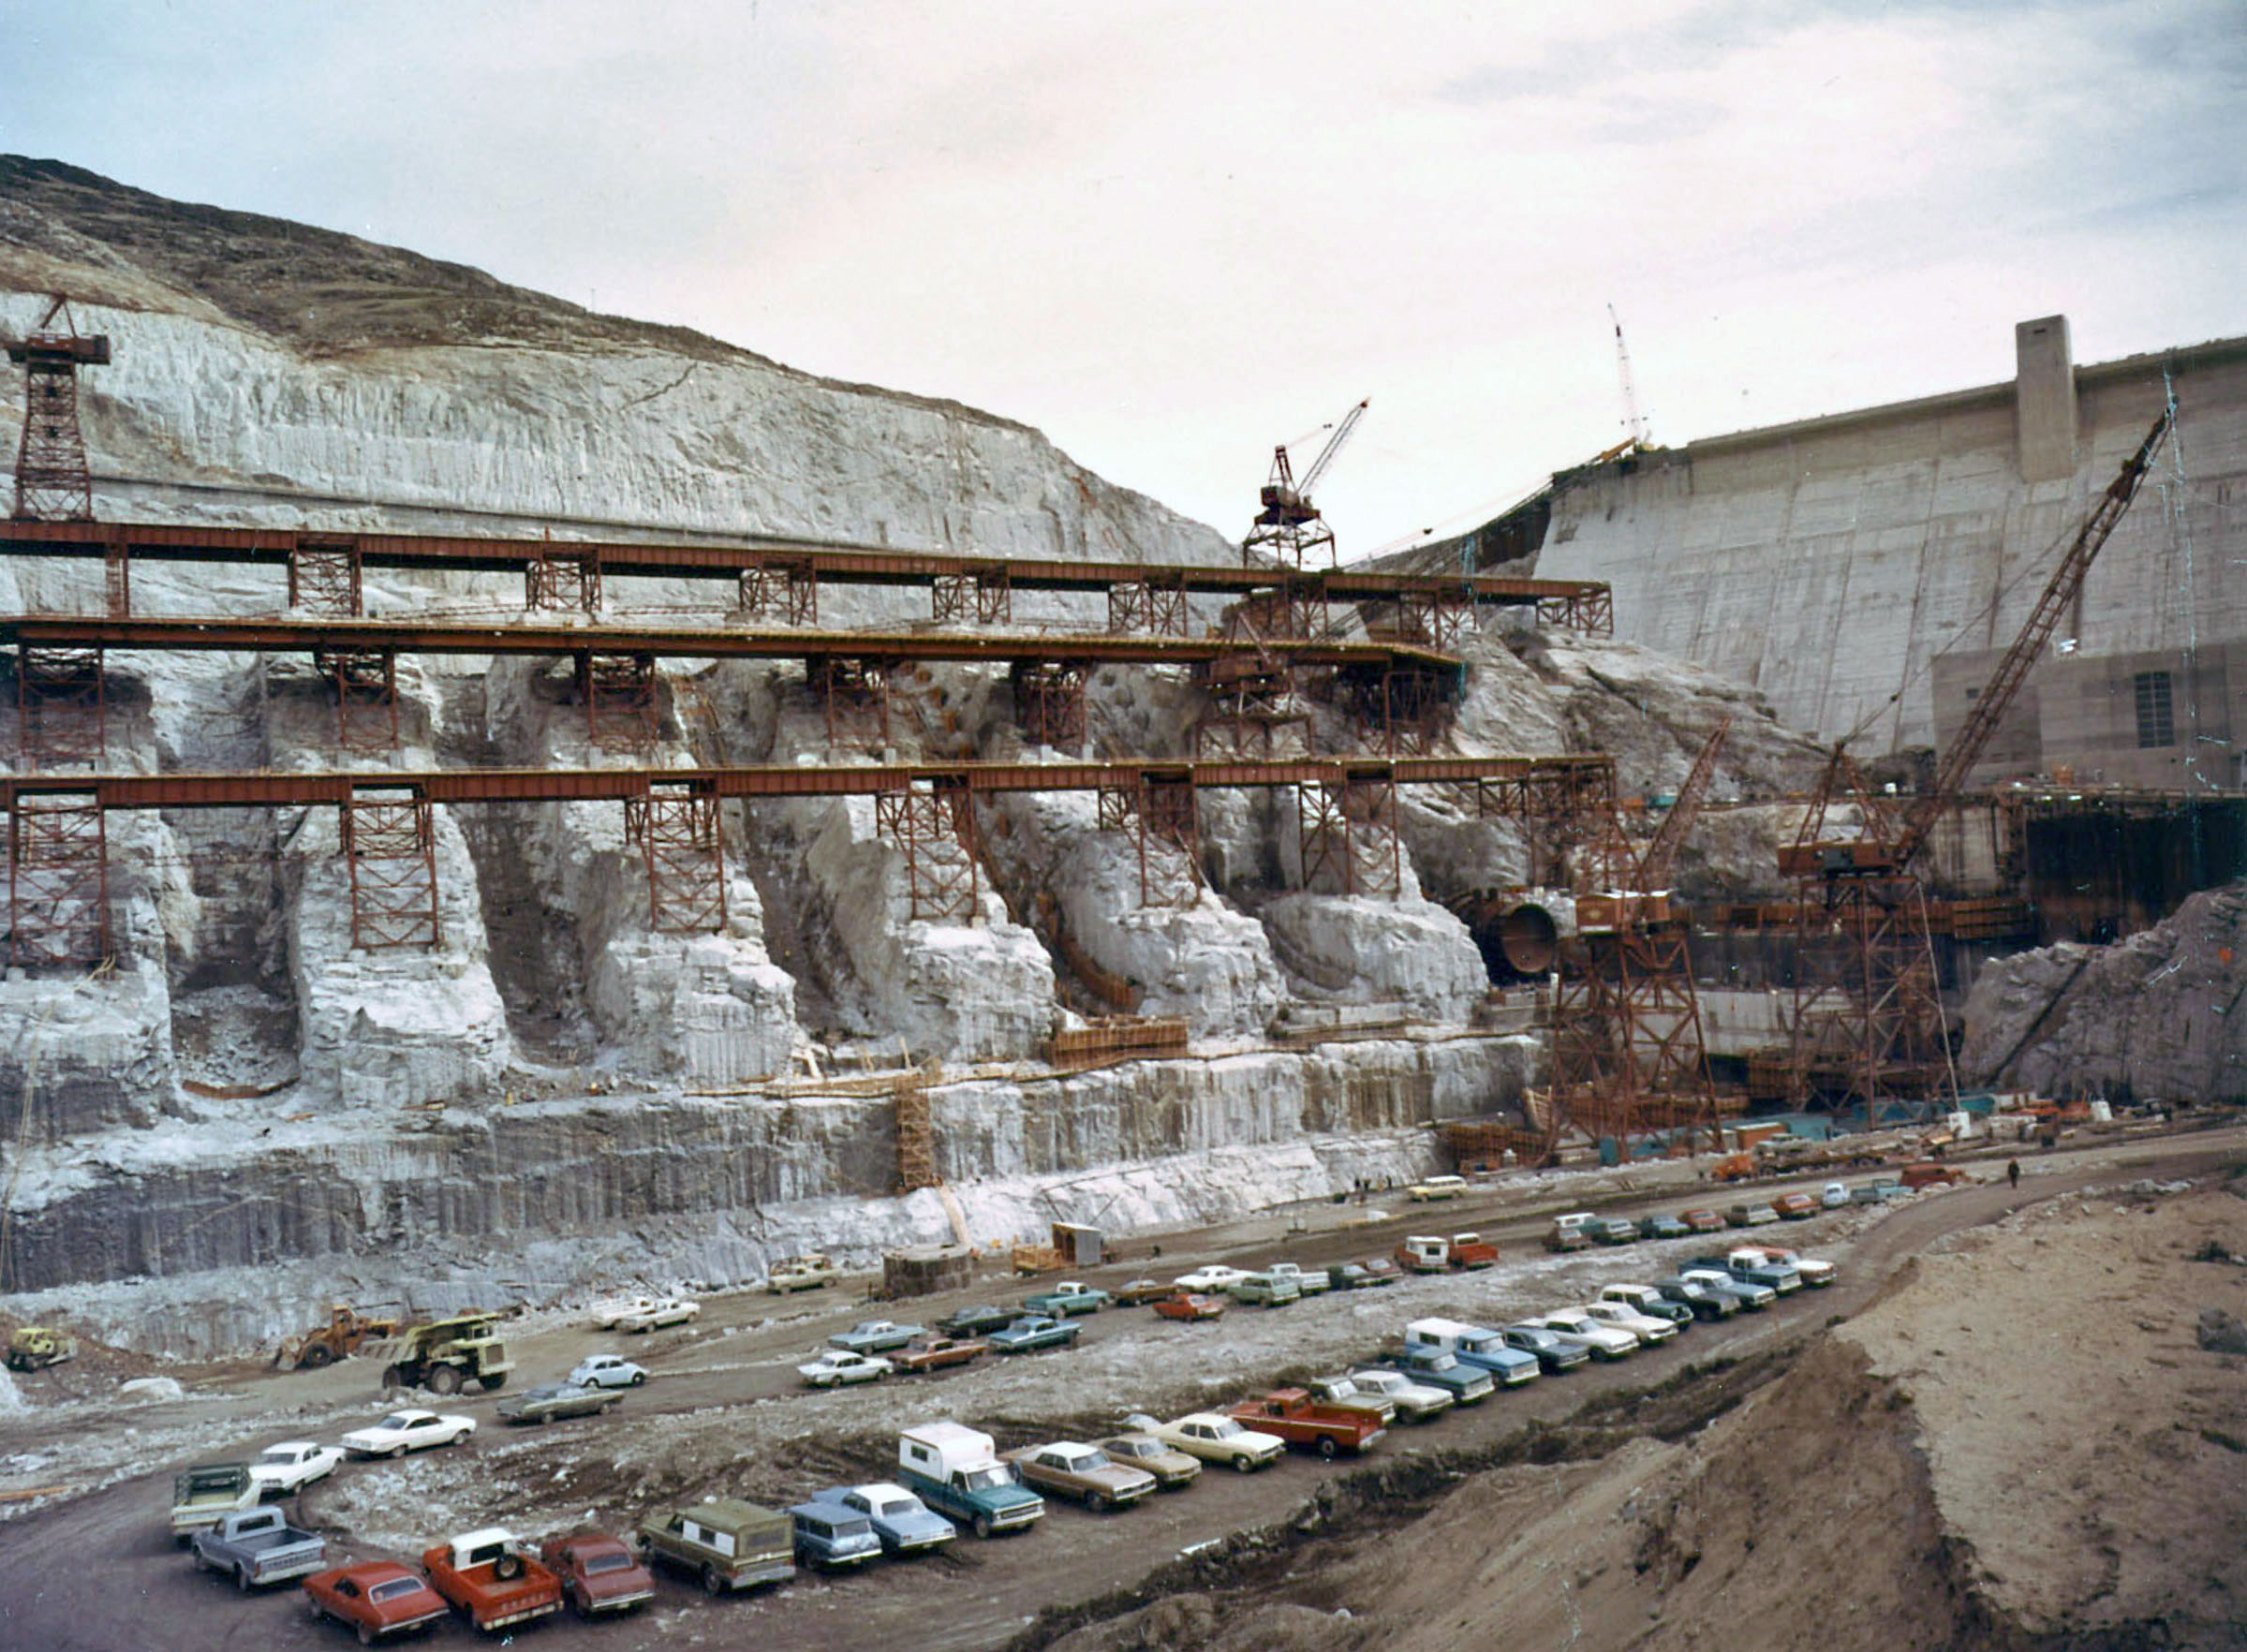 March 29, 1971. Nathaniel Washington Power Plant construction at Grand Coulee Dam.